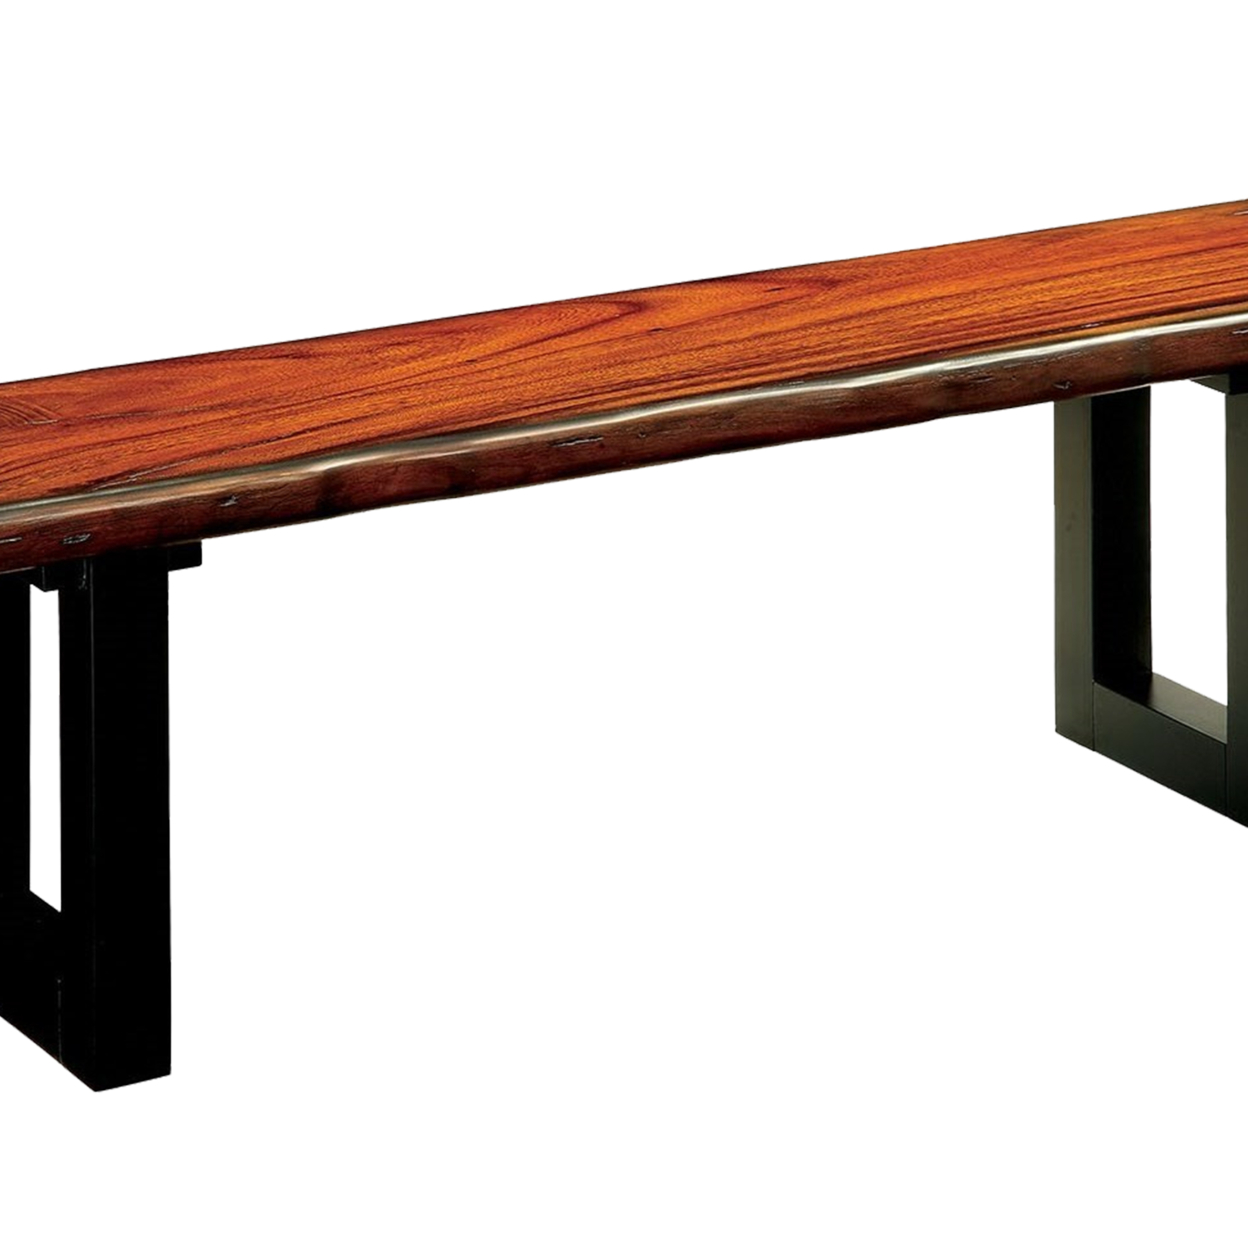 Rectangular Wooden Bench With Curved Edges And Sled Base, Brown And Black- Saltoro Sherpi